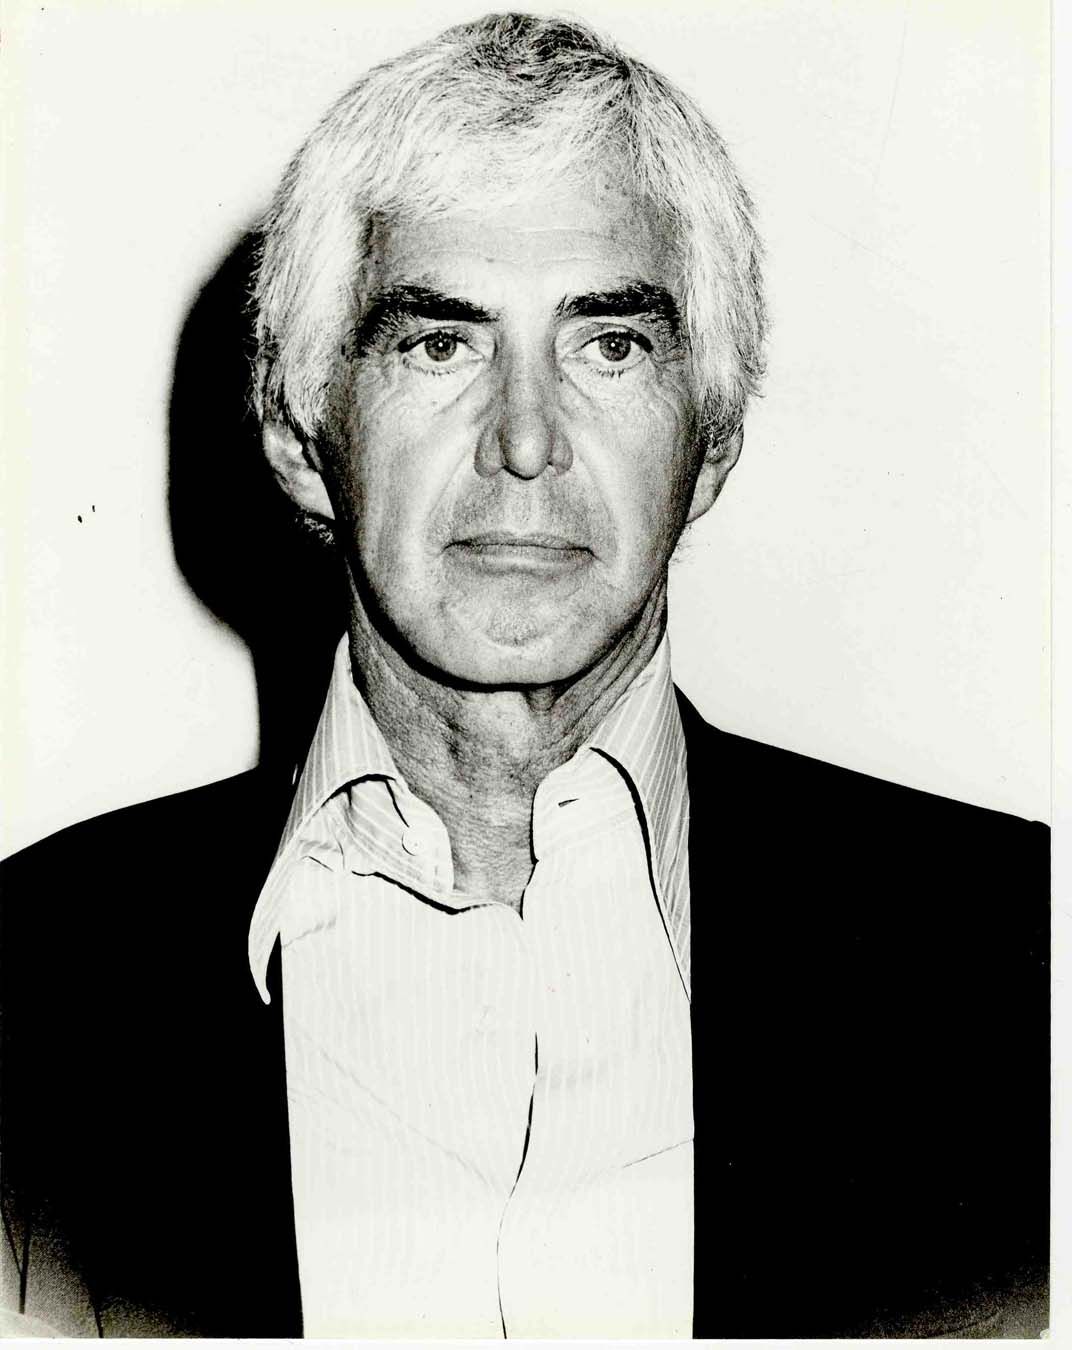 Unpublished Photo of <b>John DeLorean</b> at Spago Restaurant After Acquittal ... - 13890a_lg